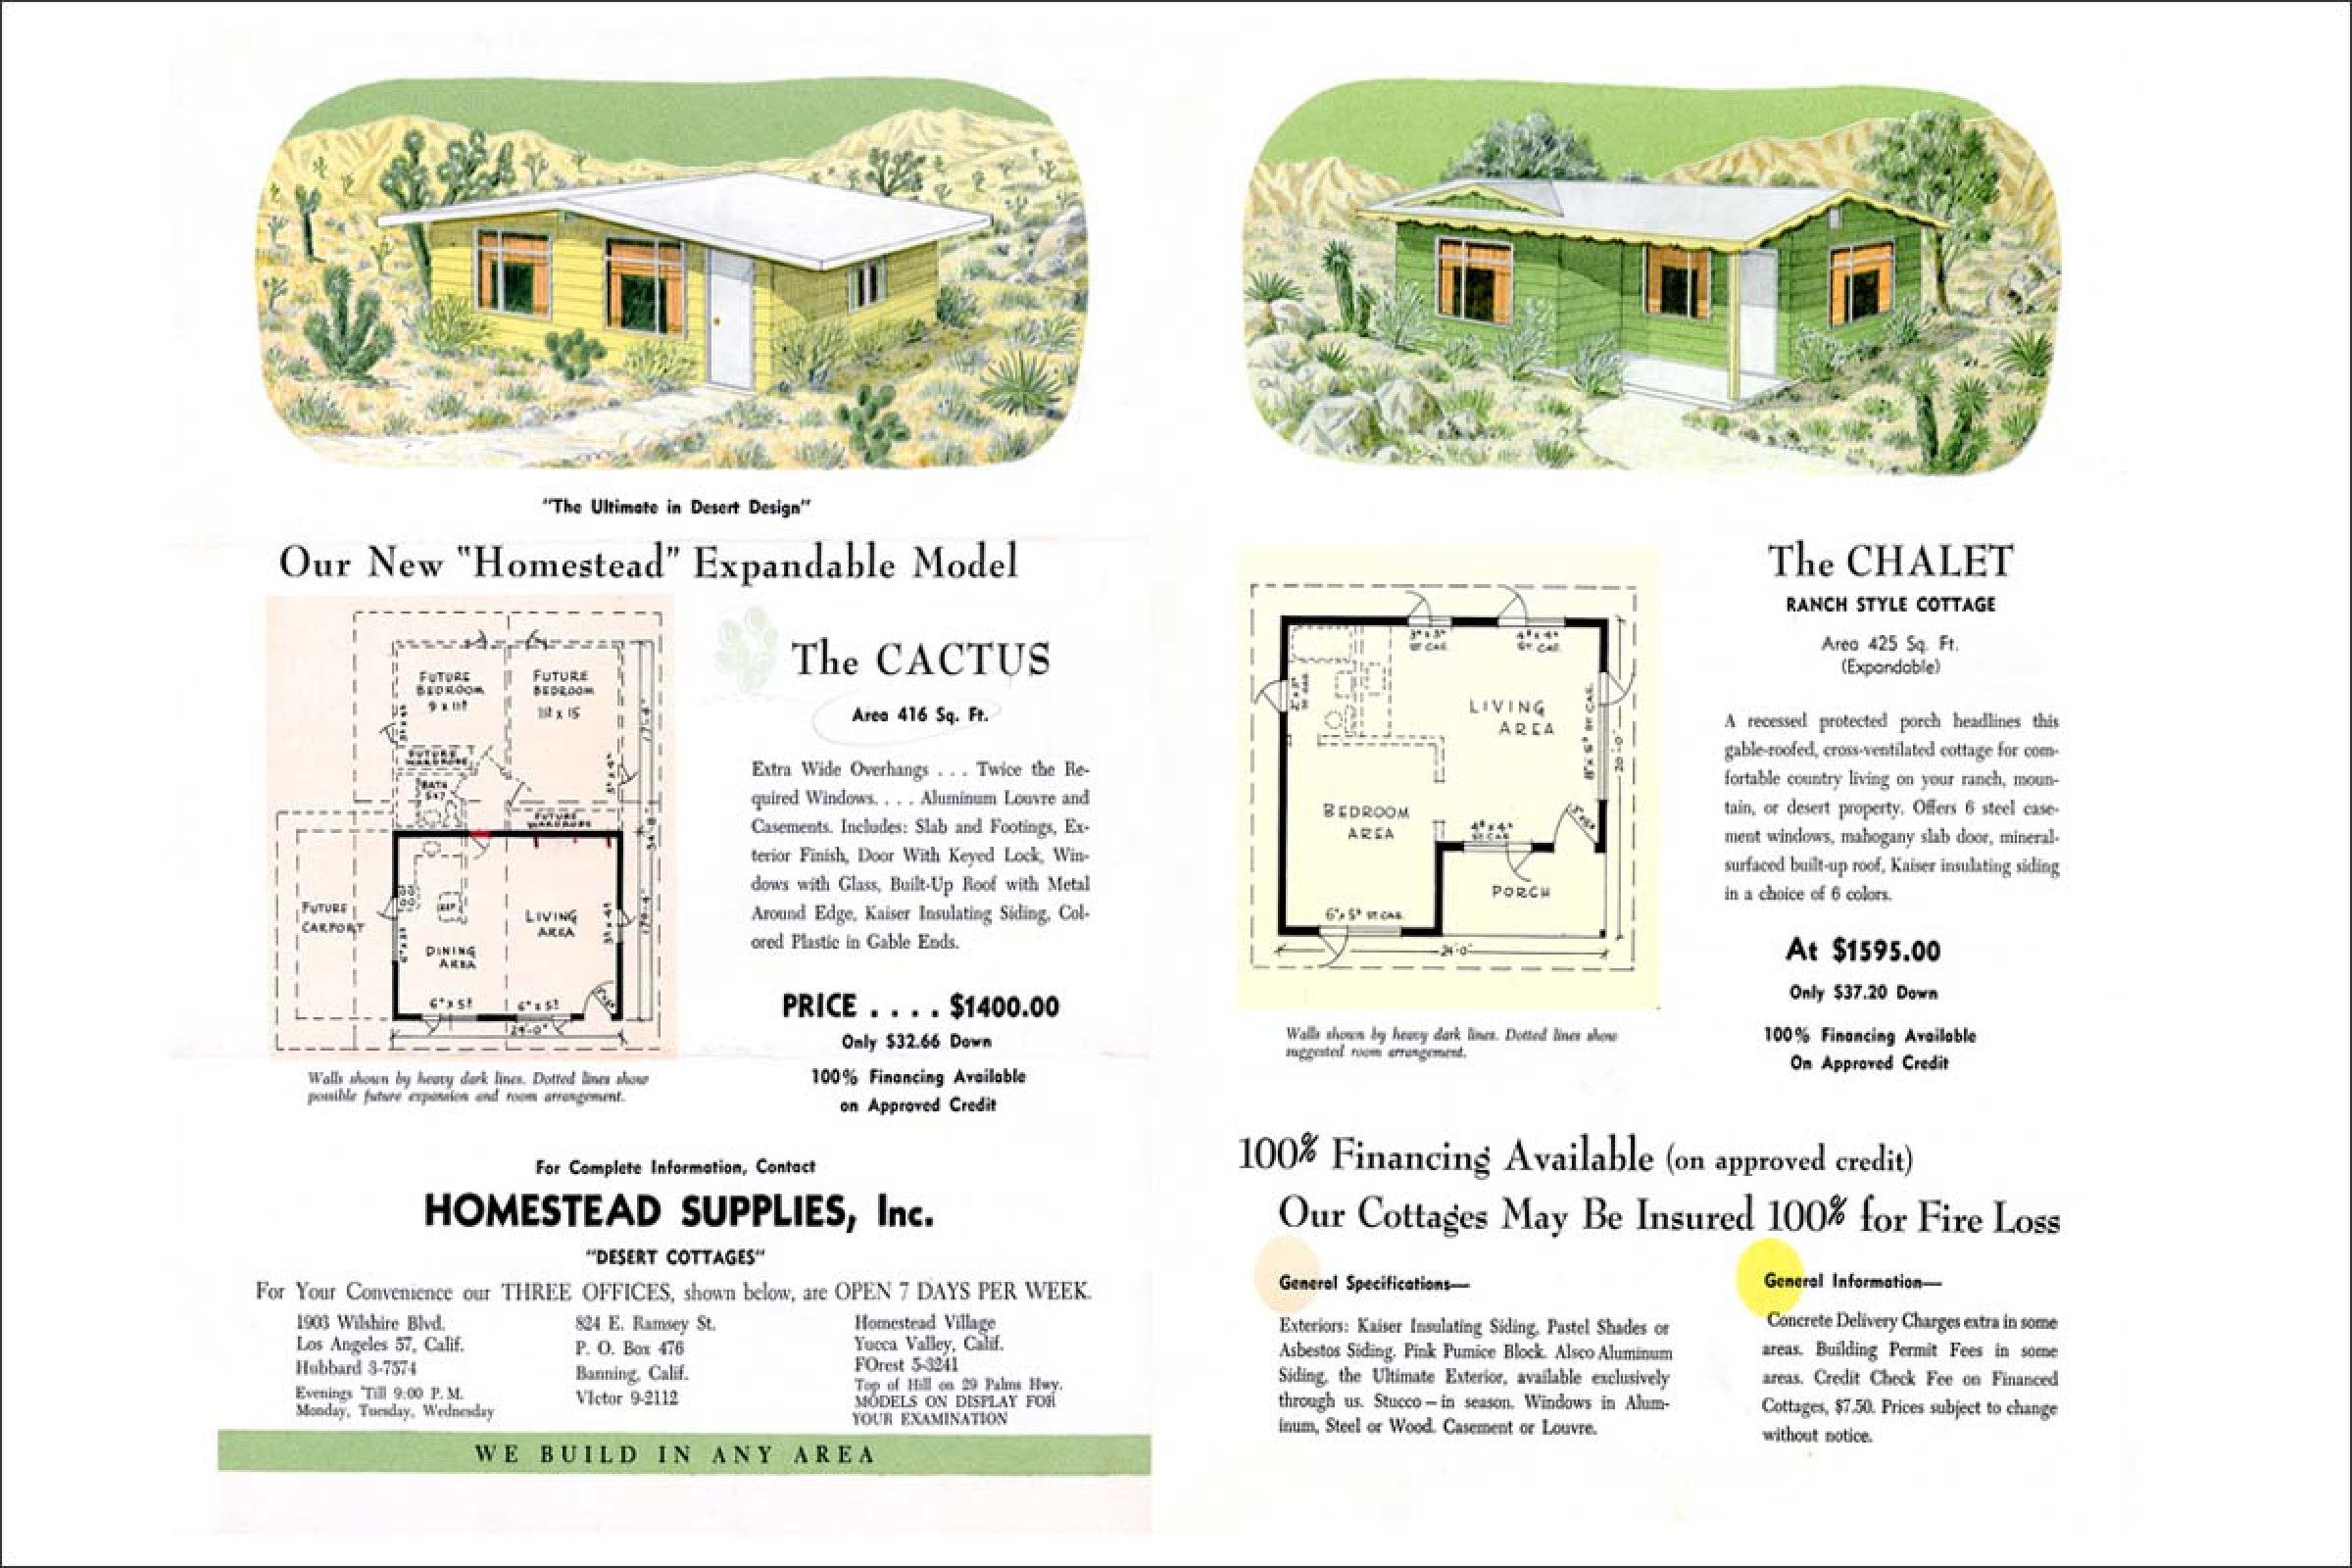 A midcentury advertisement for prefabricated homestead cabins, including illustrations and floor plans for two available models.